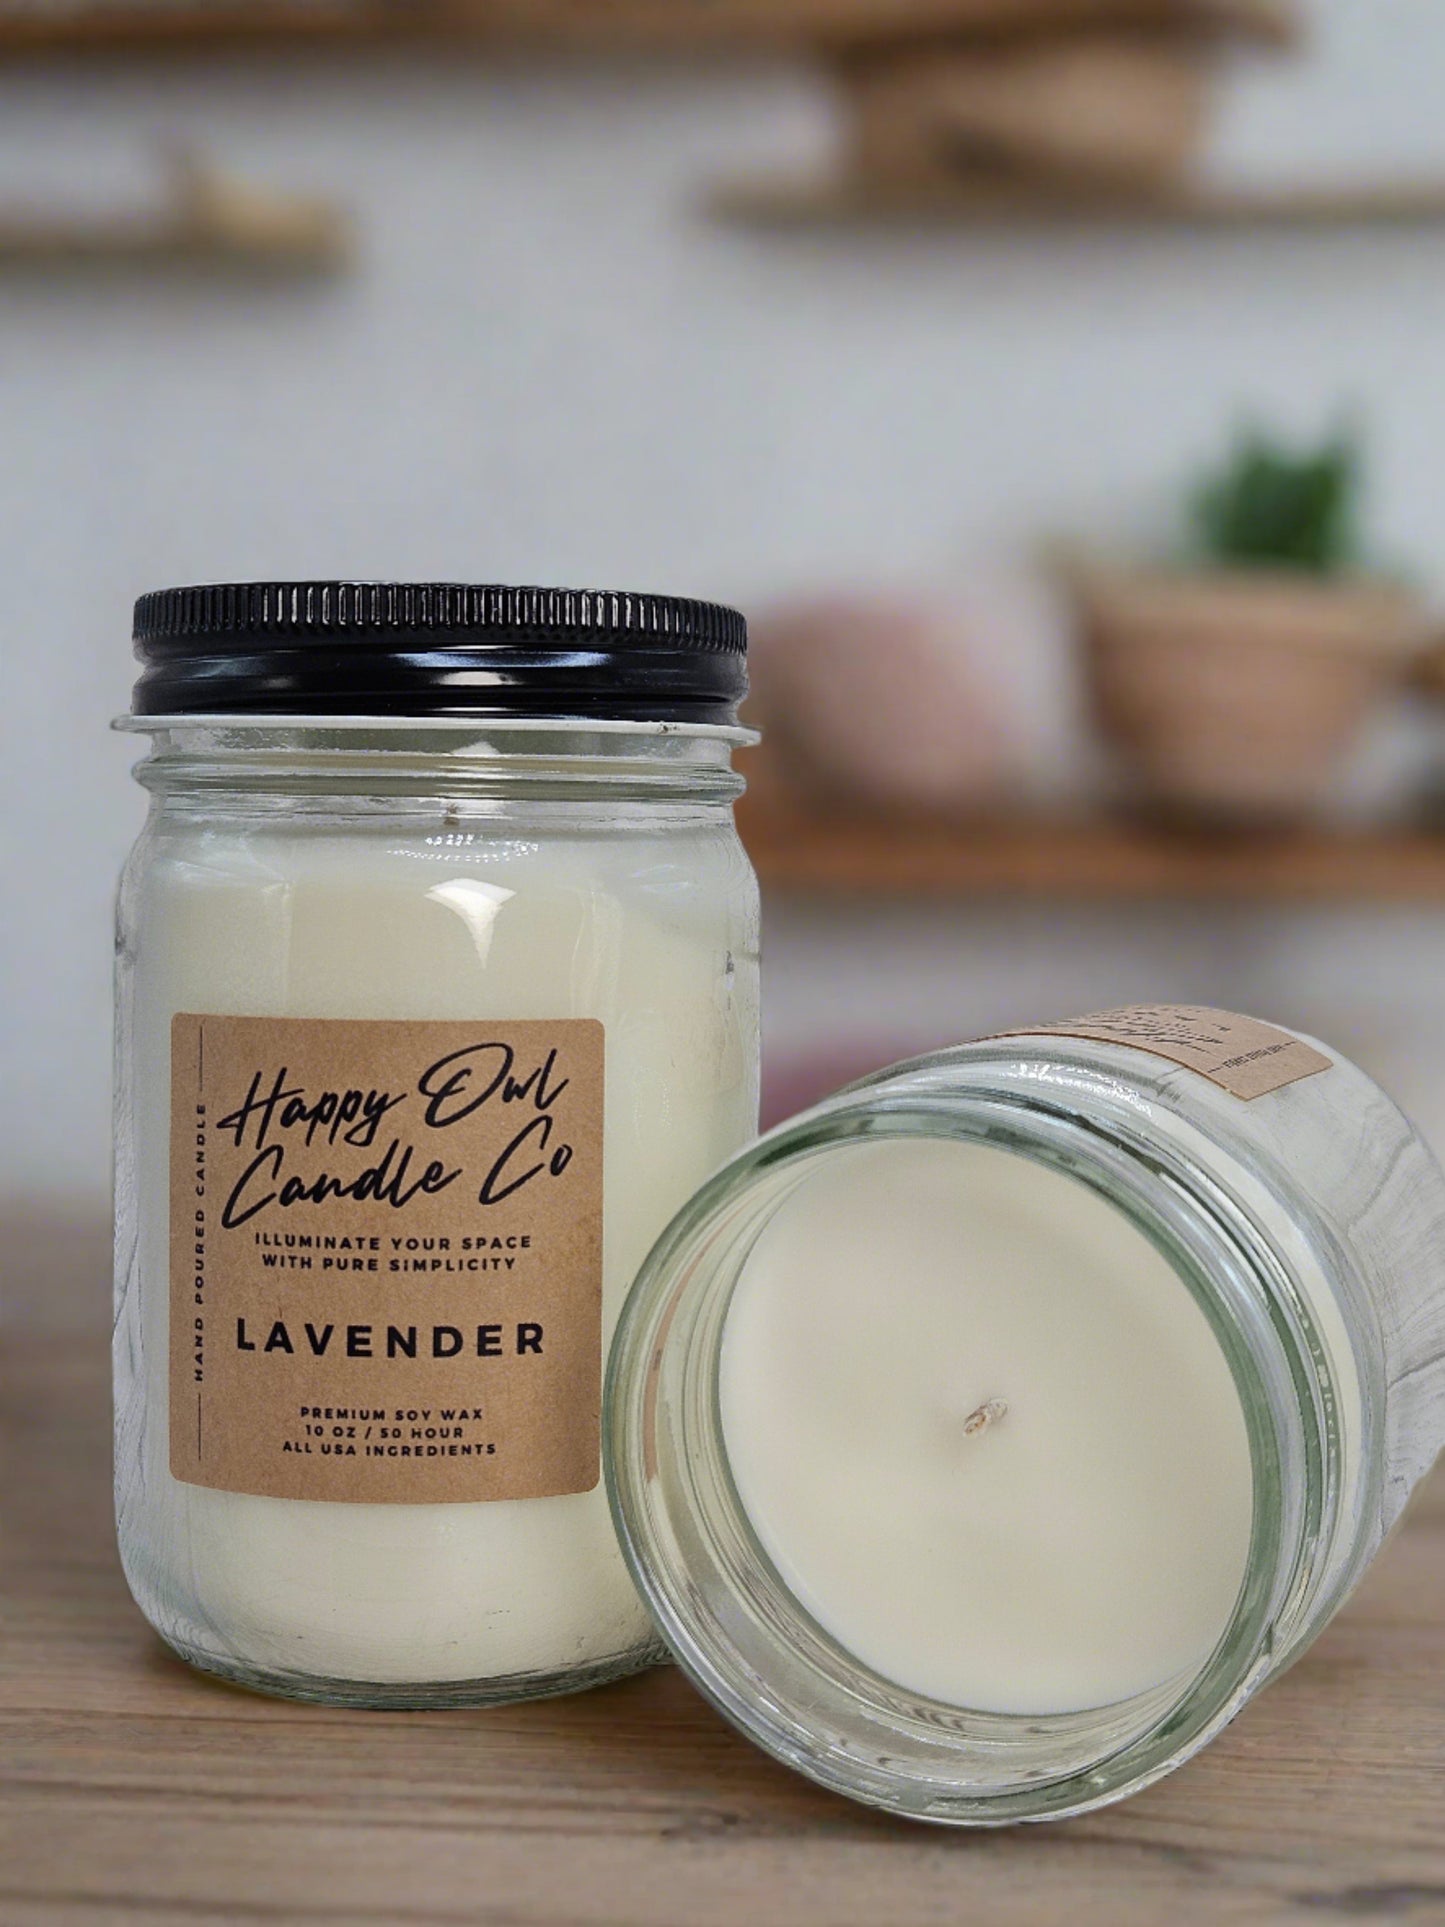 Classic Lavender 100% Soy Candle 10 oz. Small Batch | USA Ingredients